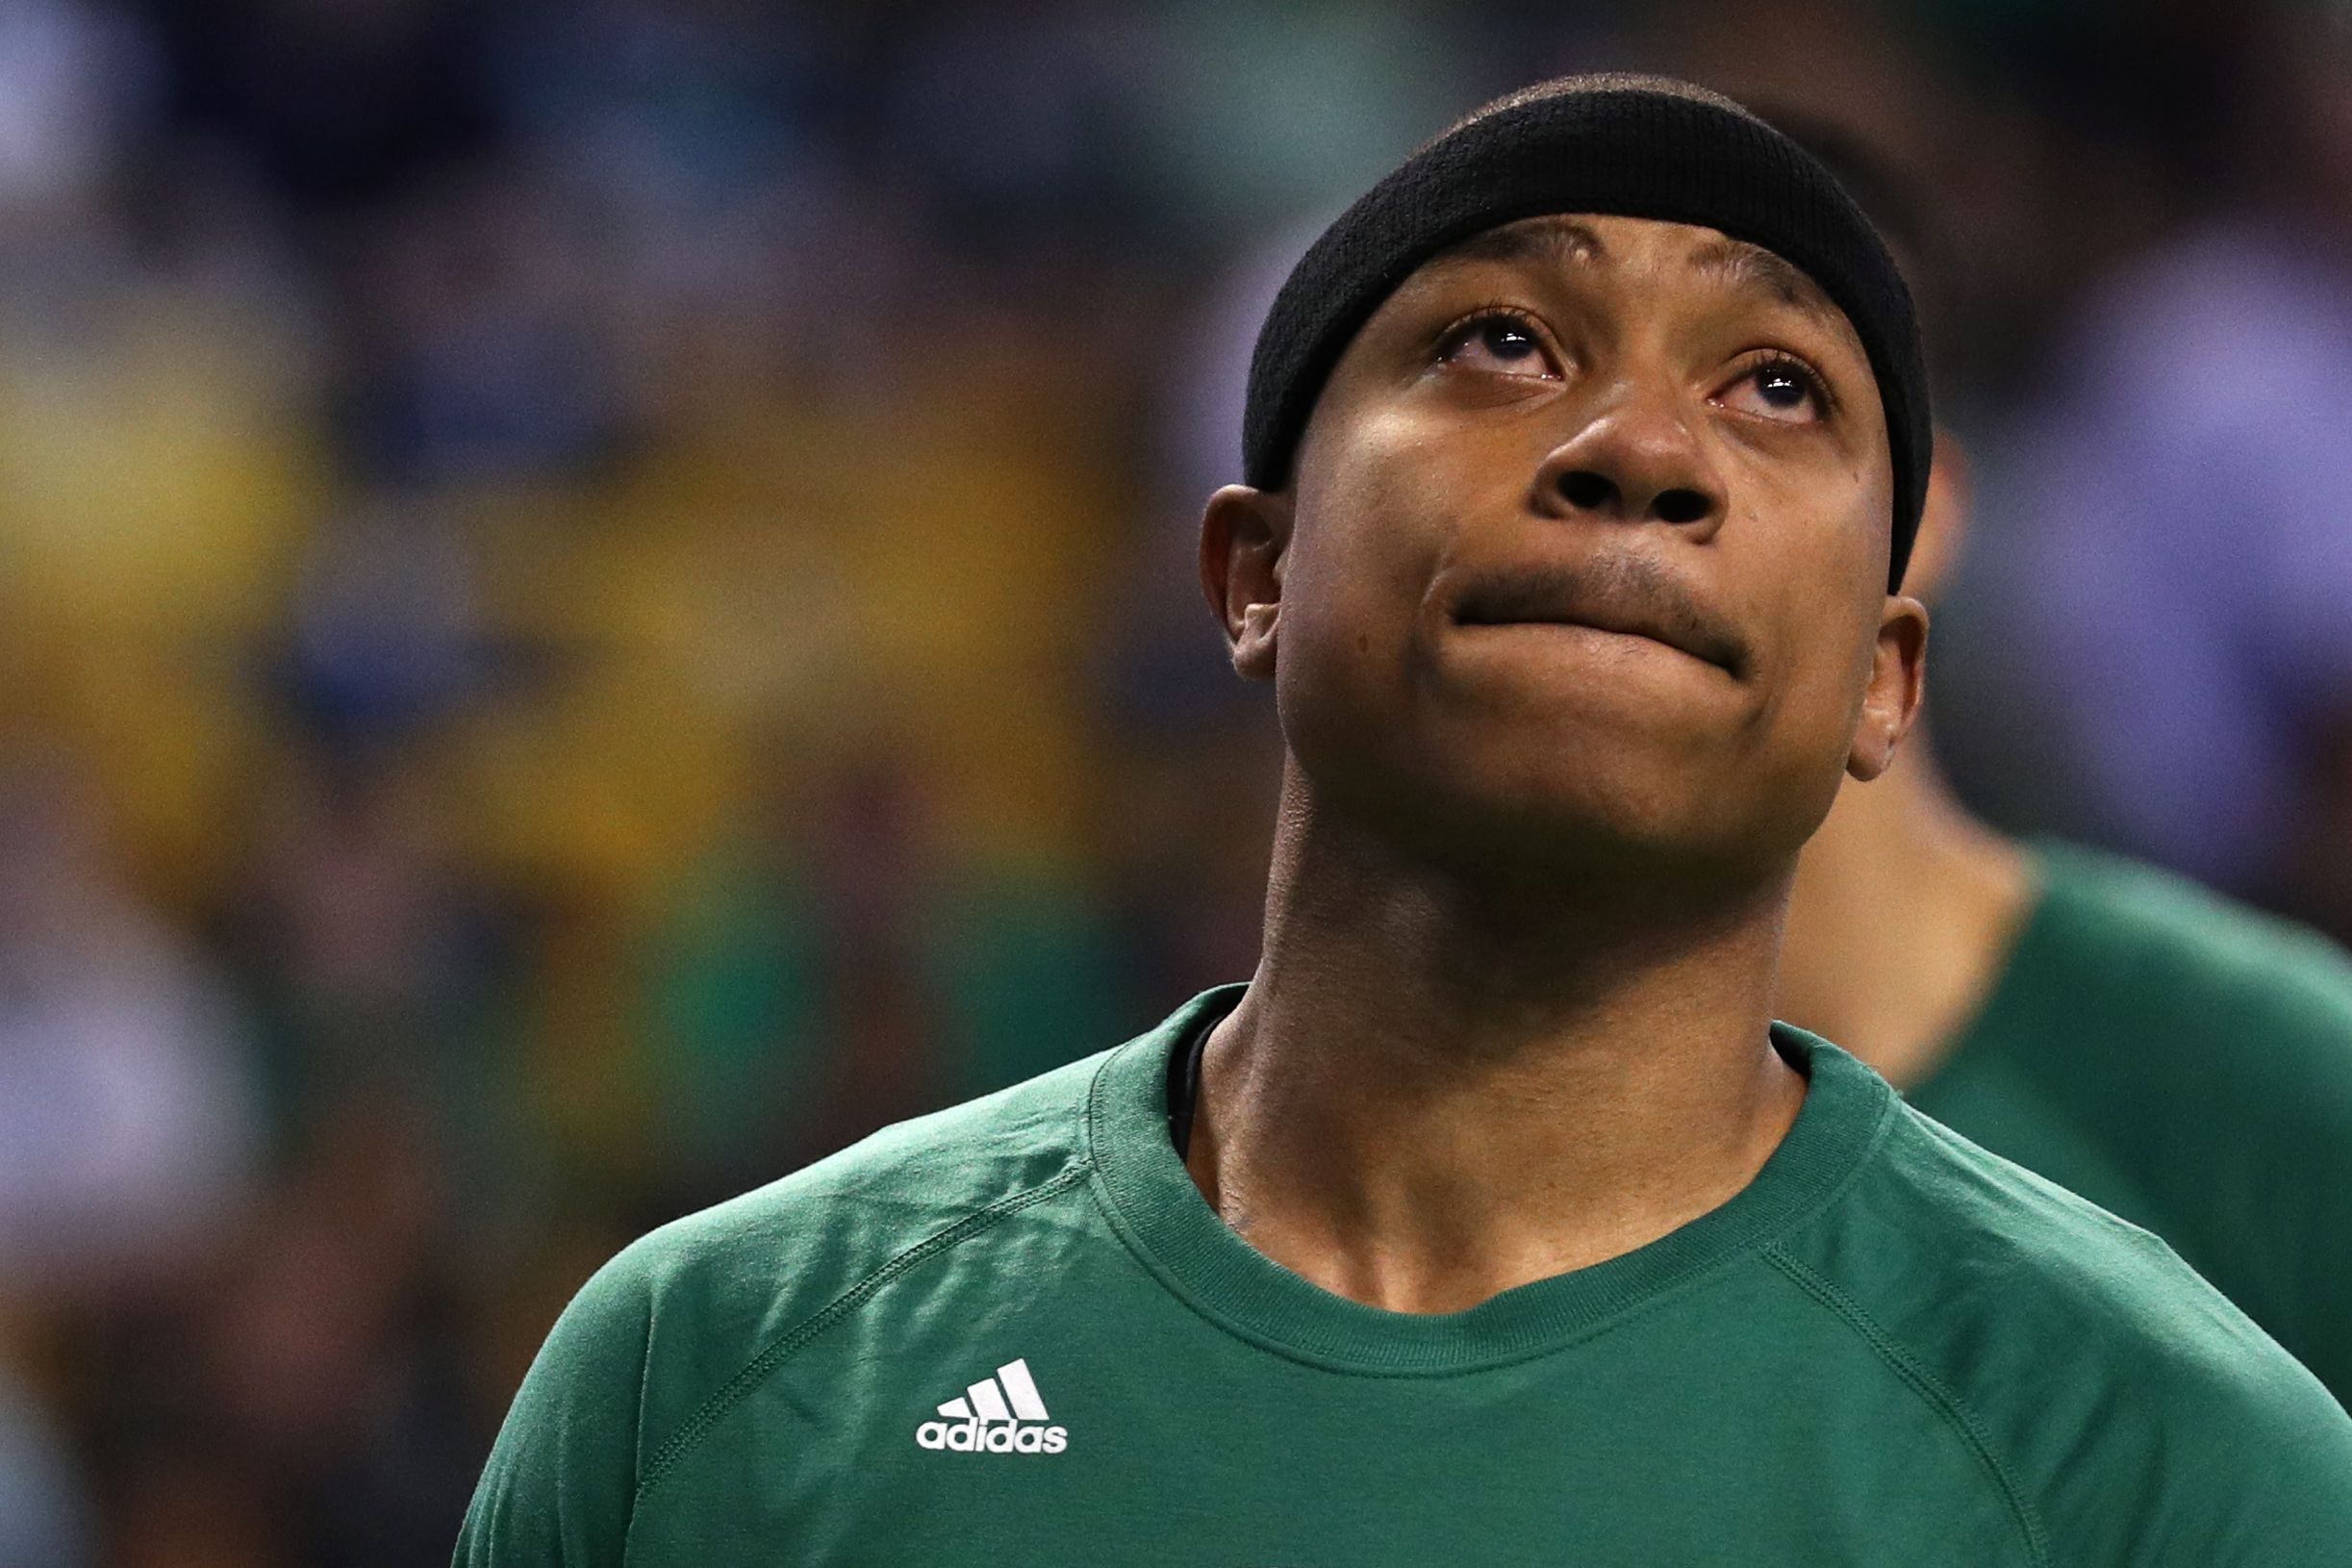 After an emotional Game 1, Isaiah Thomas's status for Game 2 is